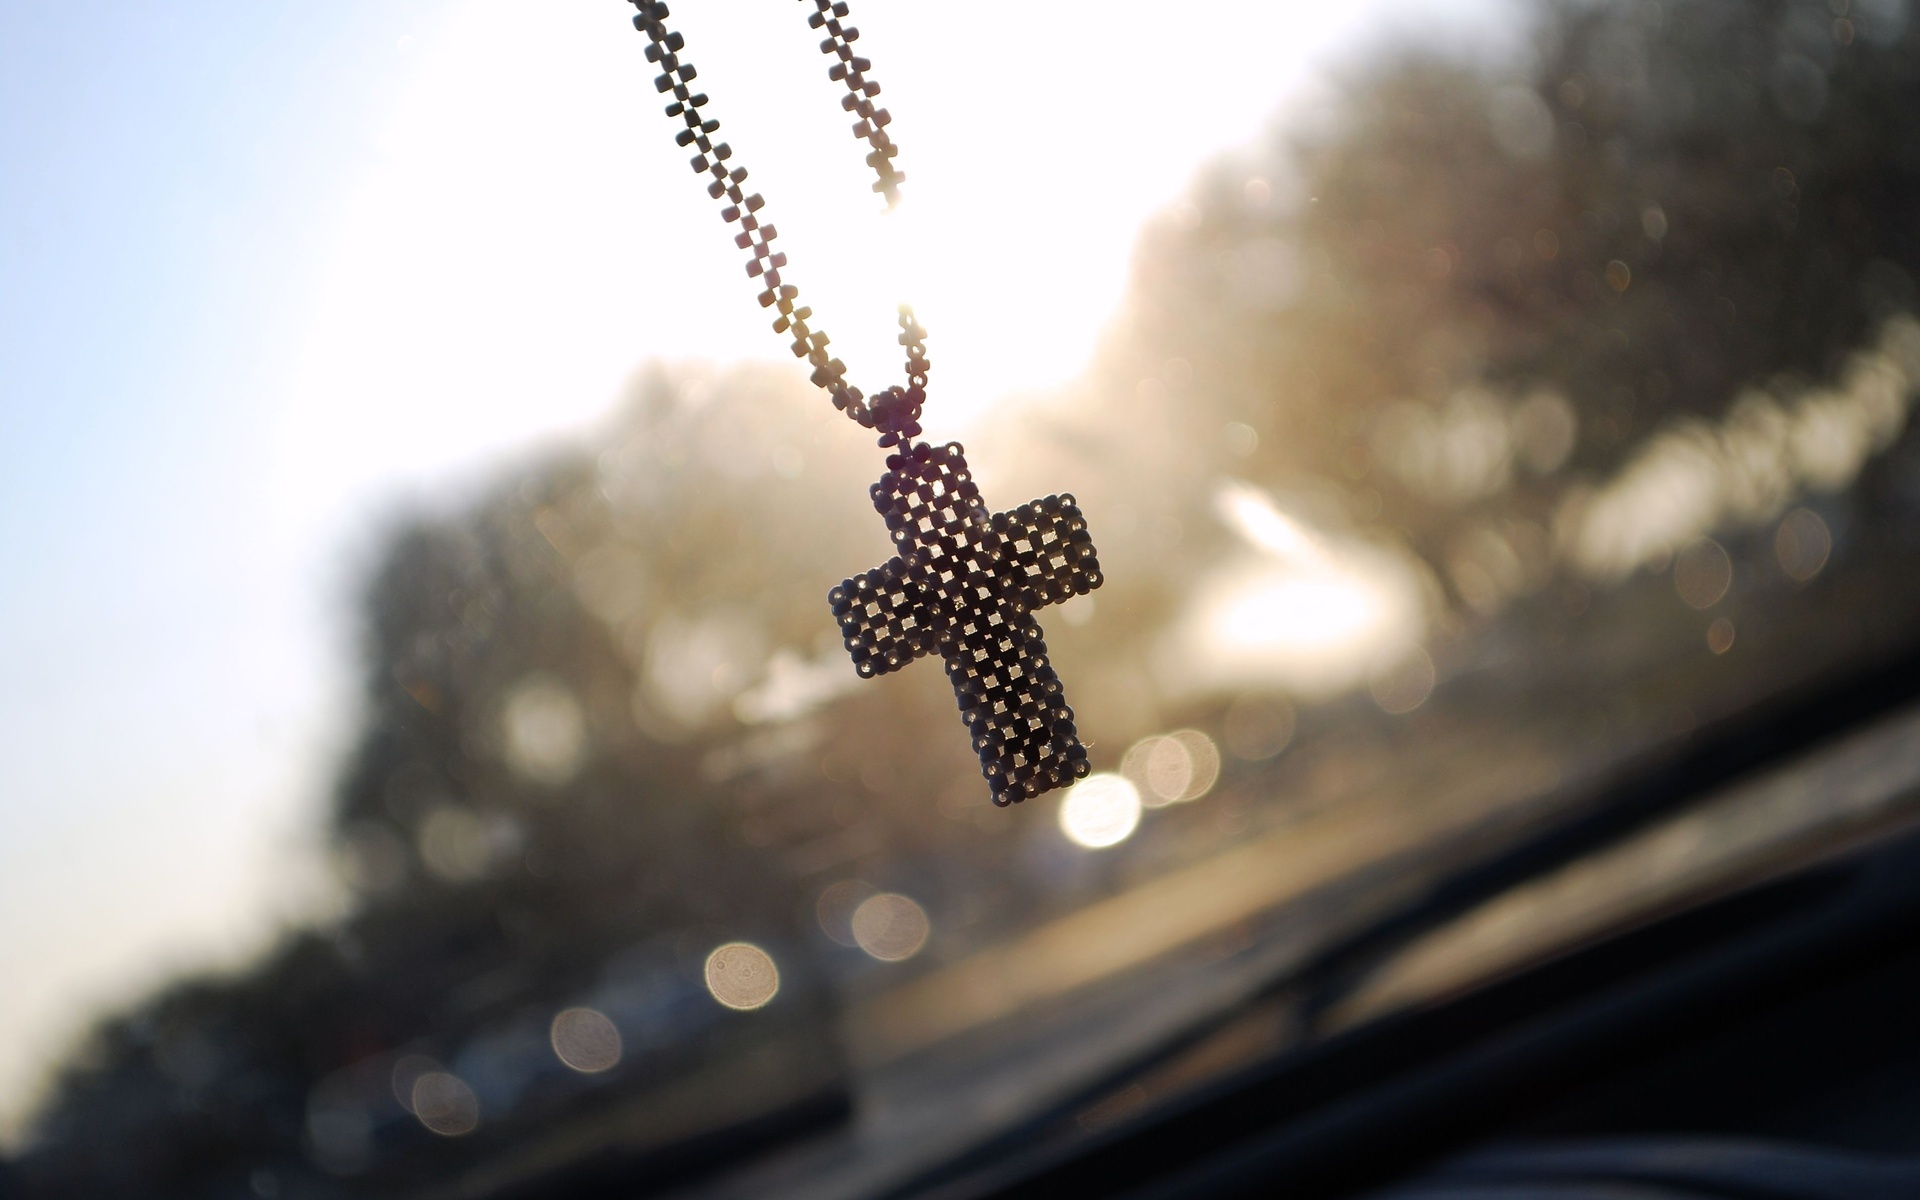 Religious Cross HD Wallpaper | Background Image